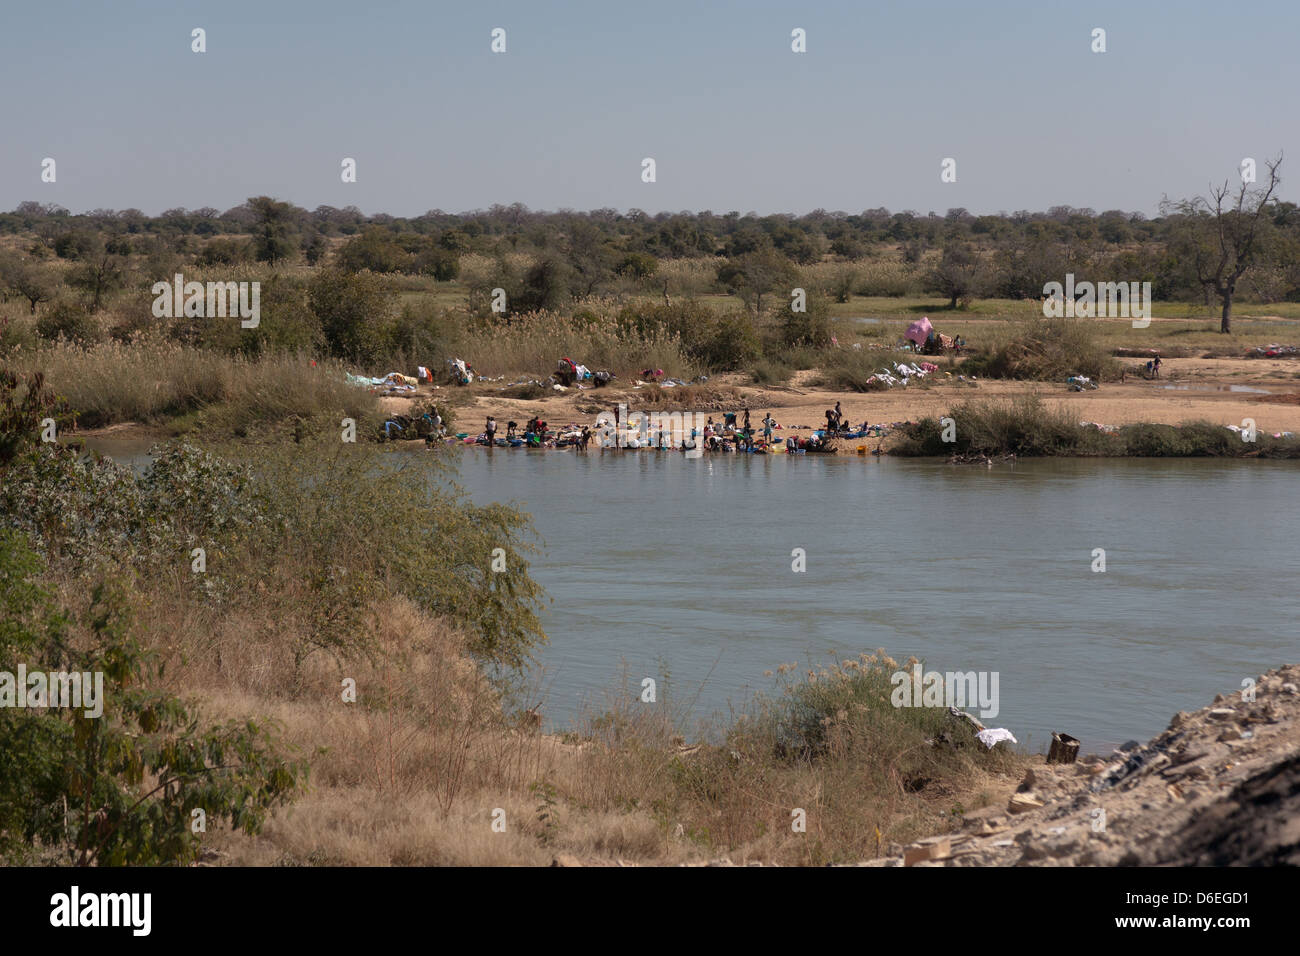 African community at the edge of the river doing washing up Stock Photo